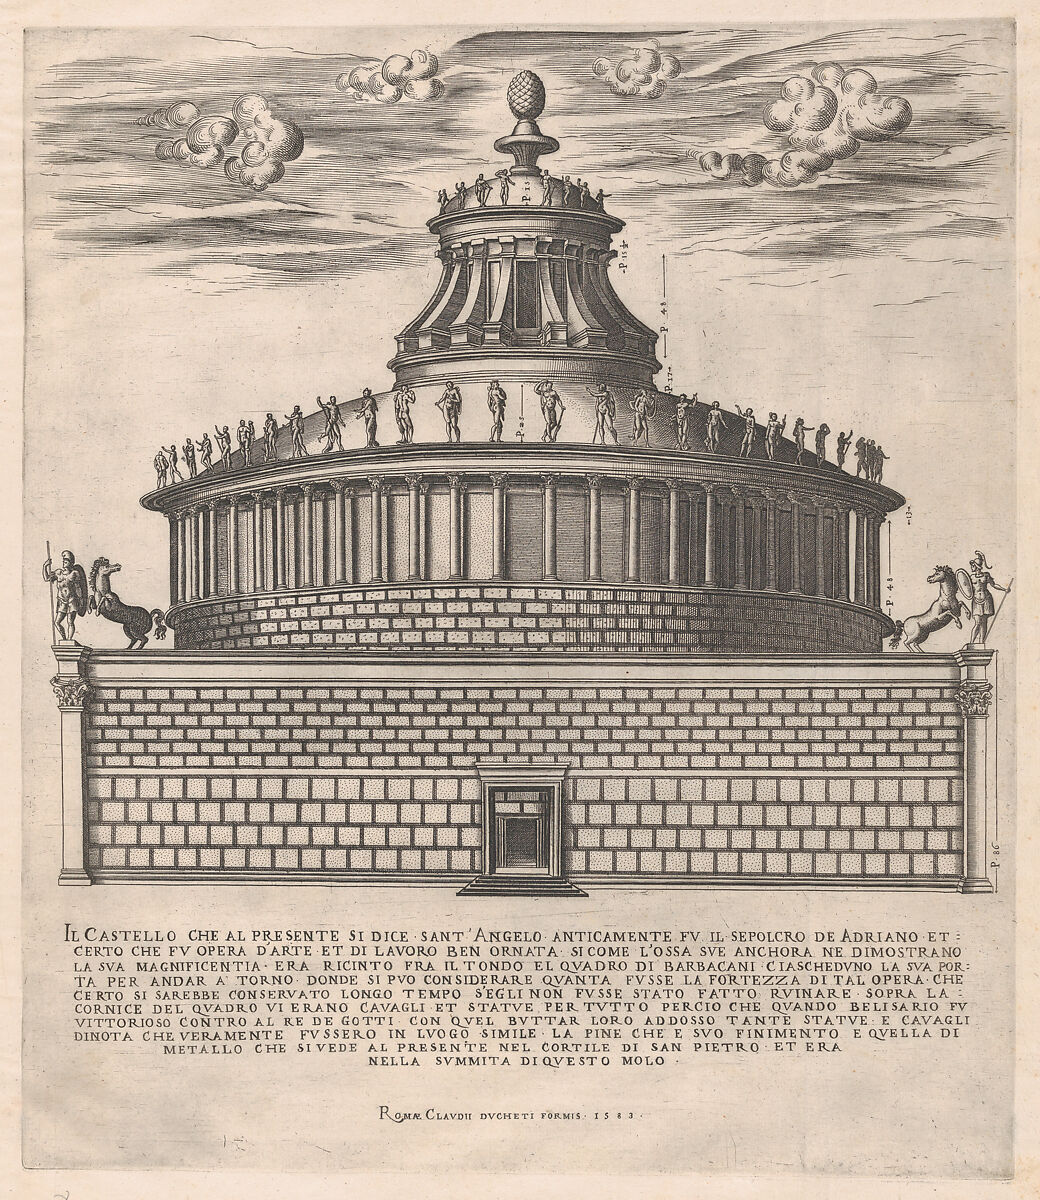 The Sepulchre of Hadrian, from "Speculum Romanae Magnificentiae", Anonymous, Engraving 